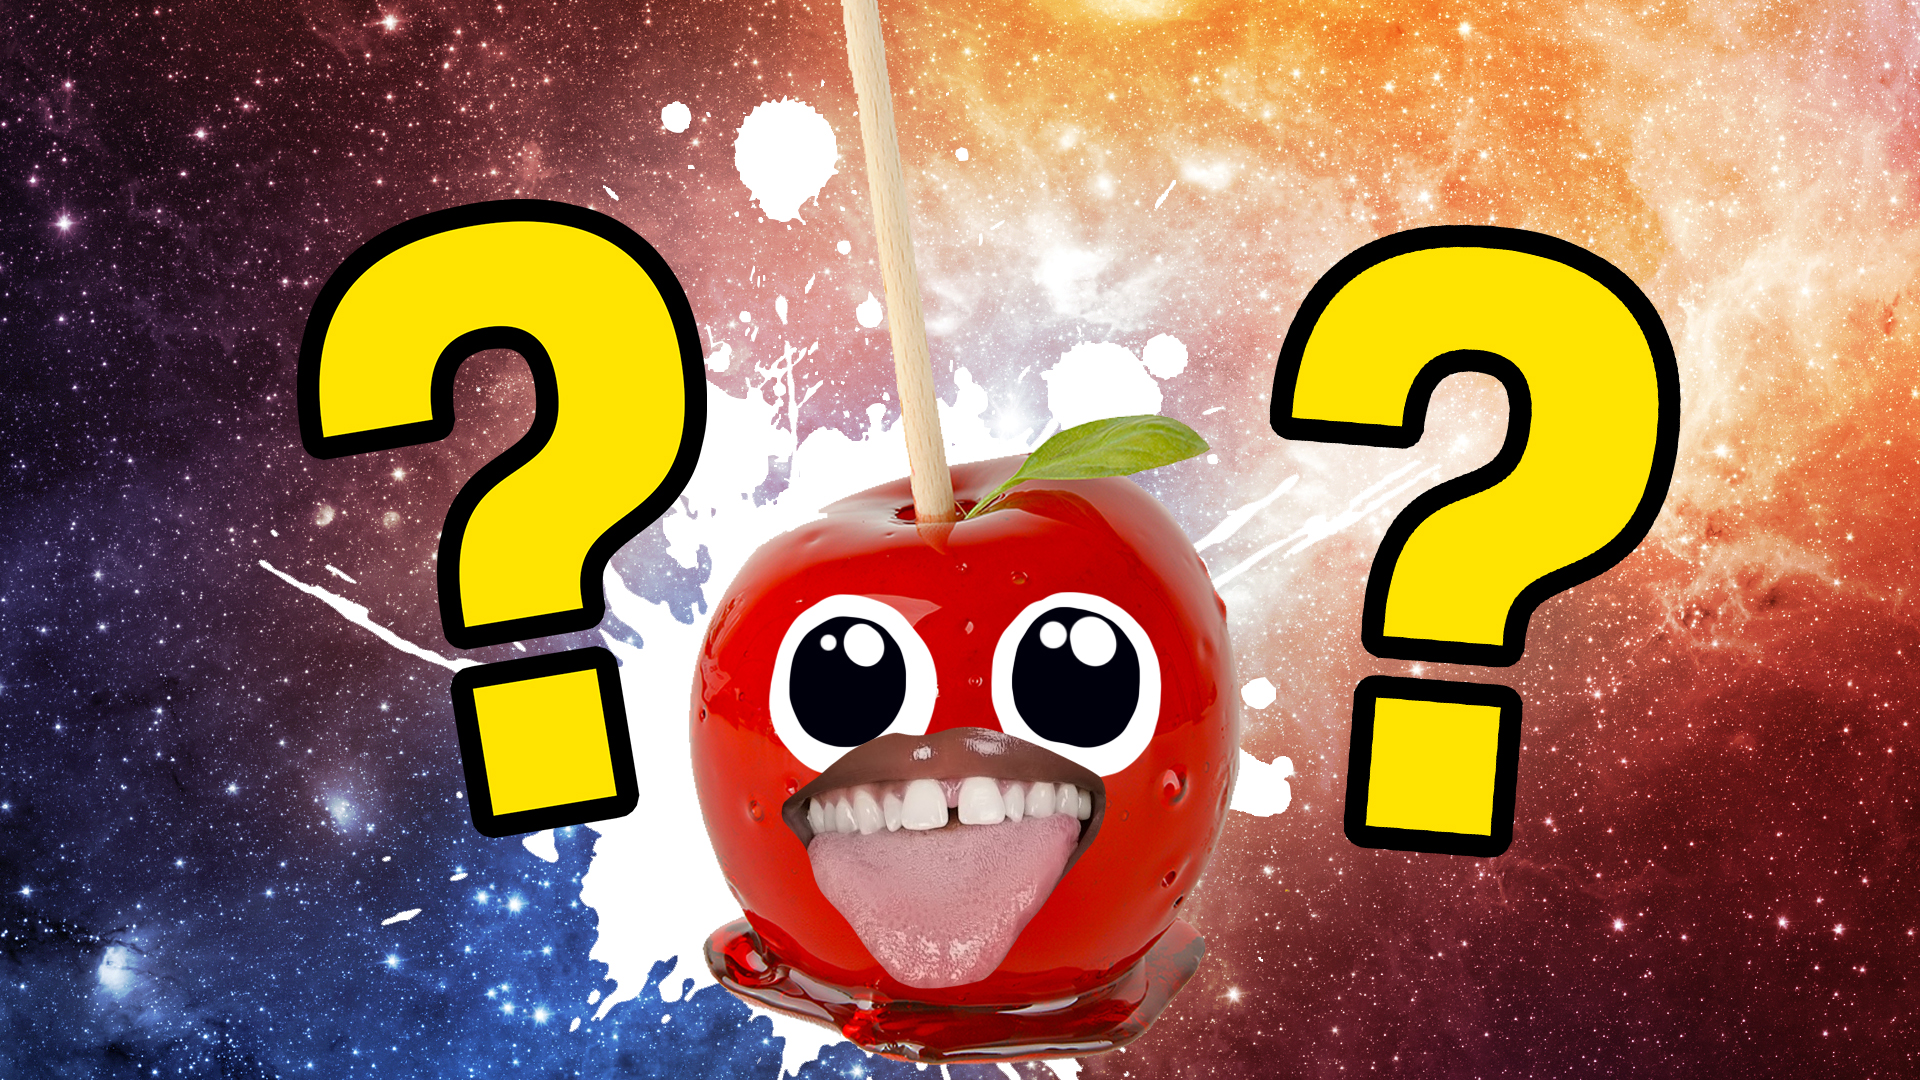 A smiling toffee apple in space